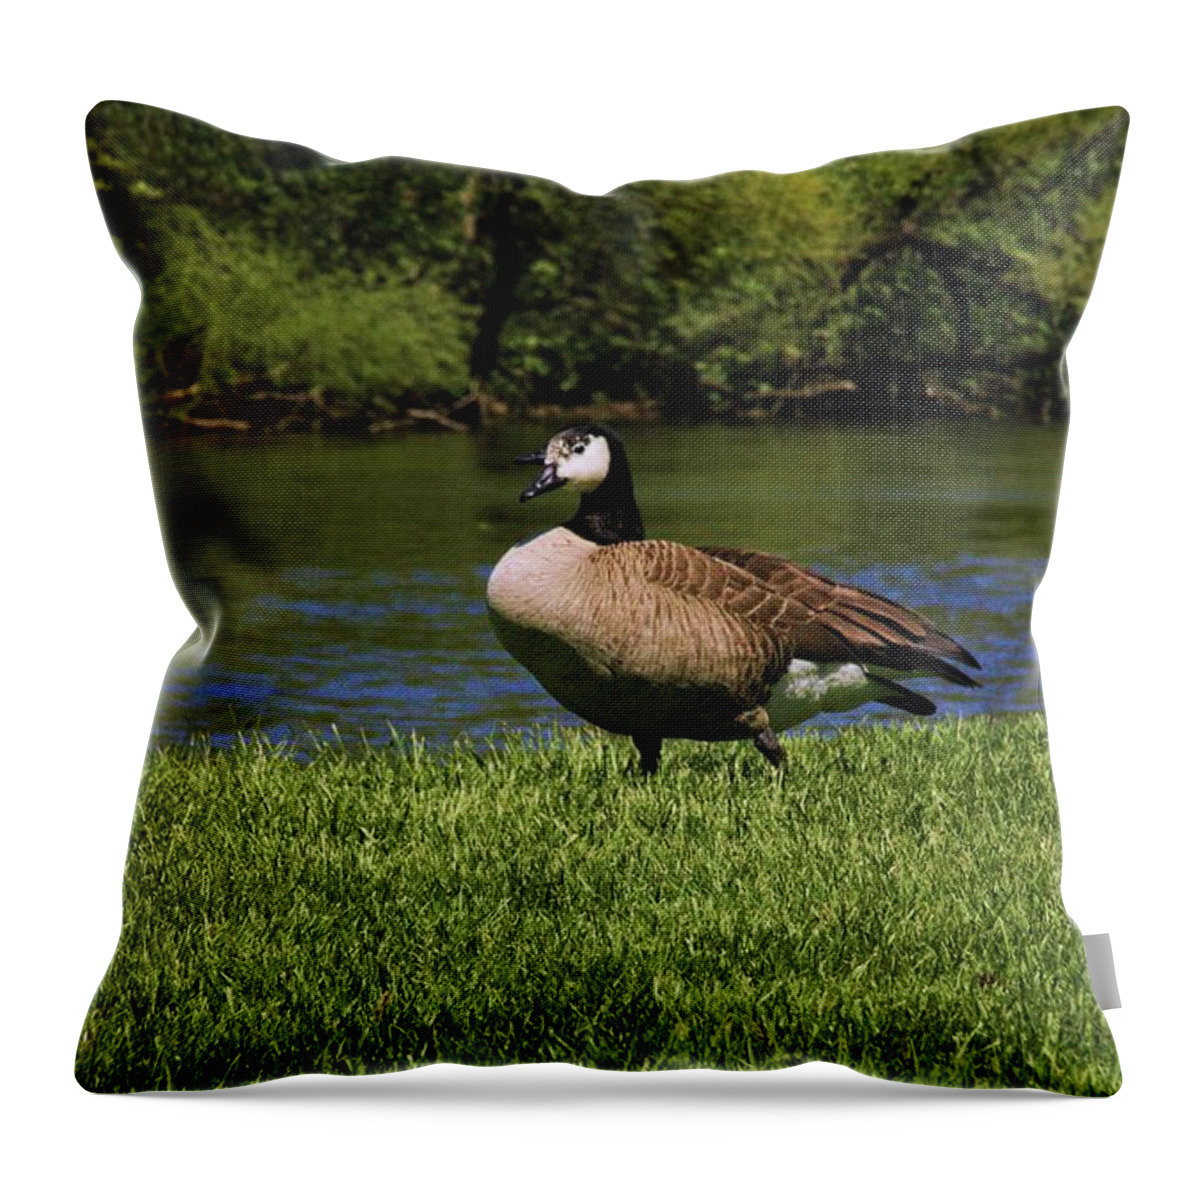 Animals Throw Pillow featuring the photograph Animal 3 by Karl Rose